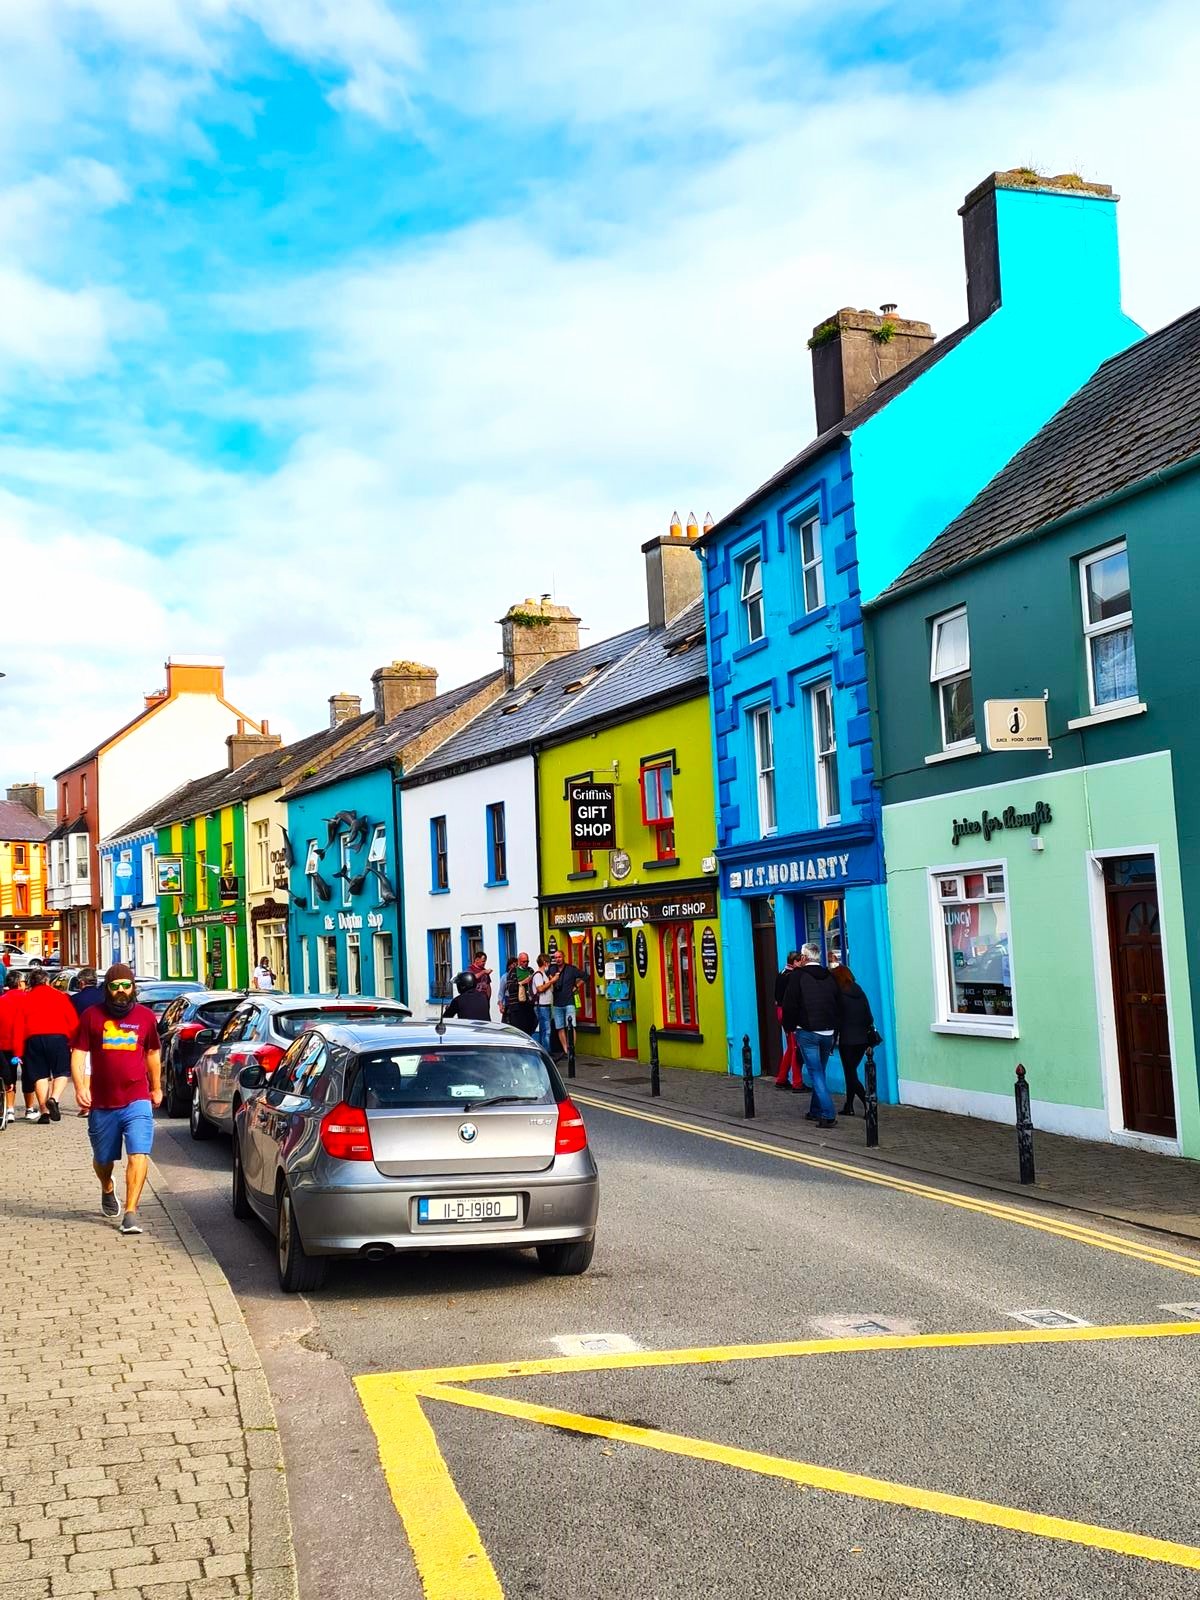  Many colourful buildings along the high street in Dingle 